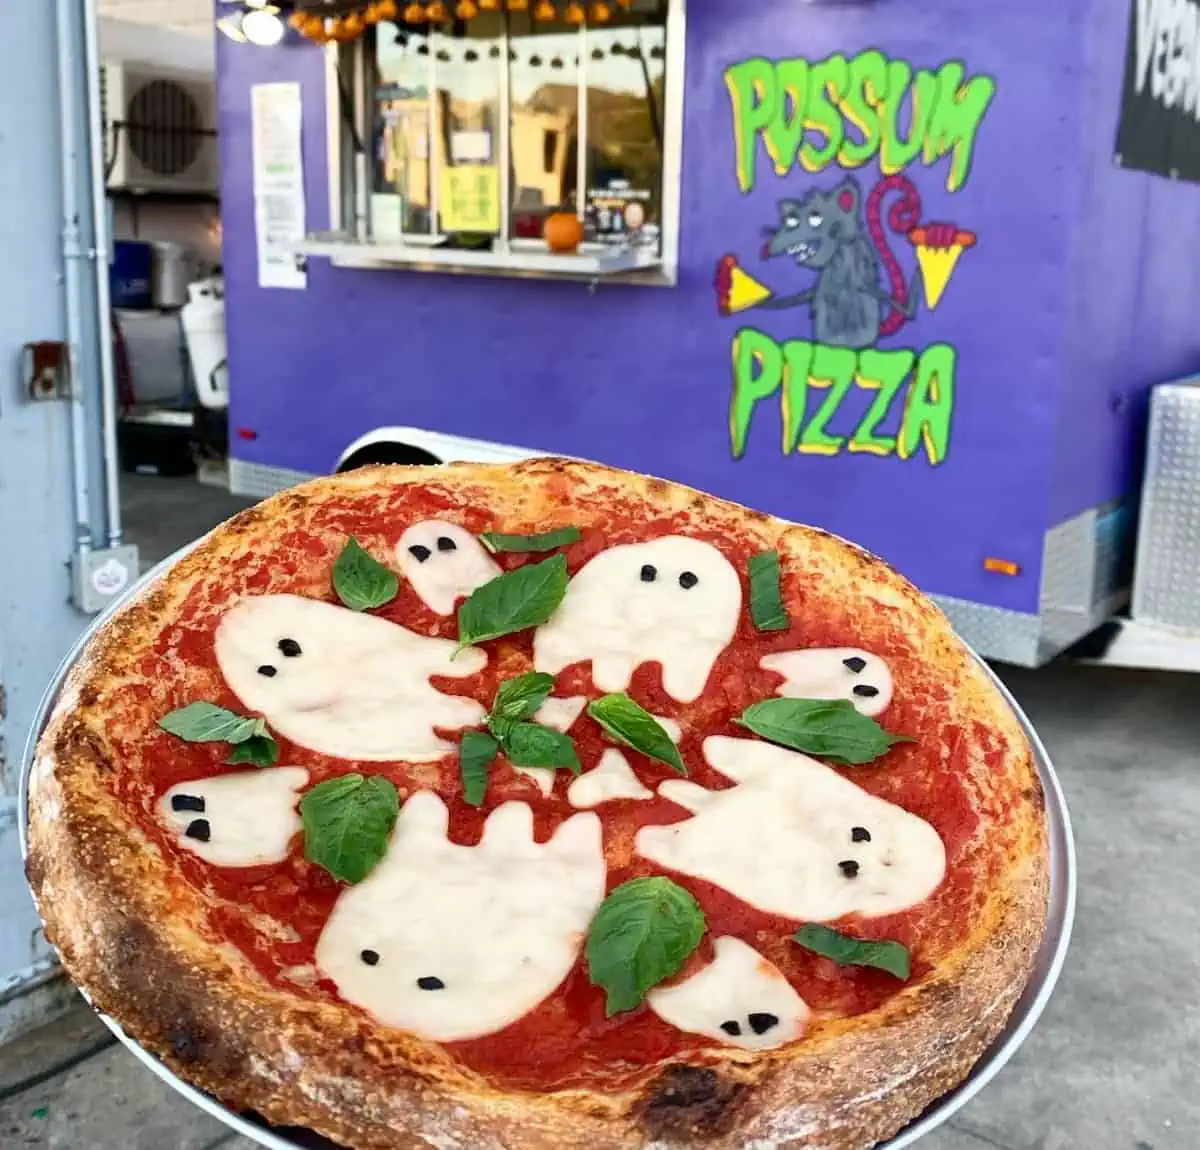 A vegan mozzarella and basil ghost pizza from Possum Pizza.